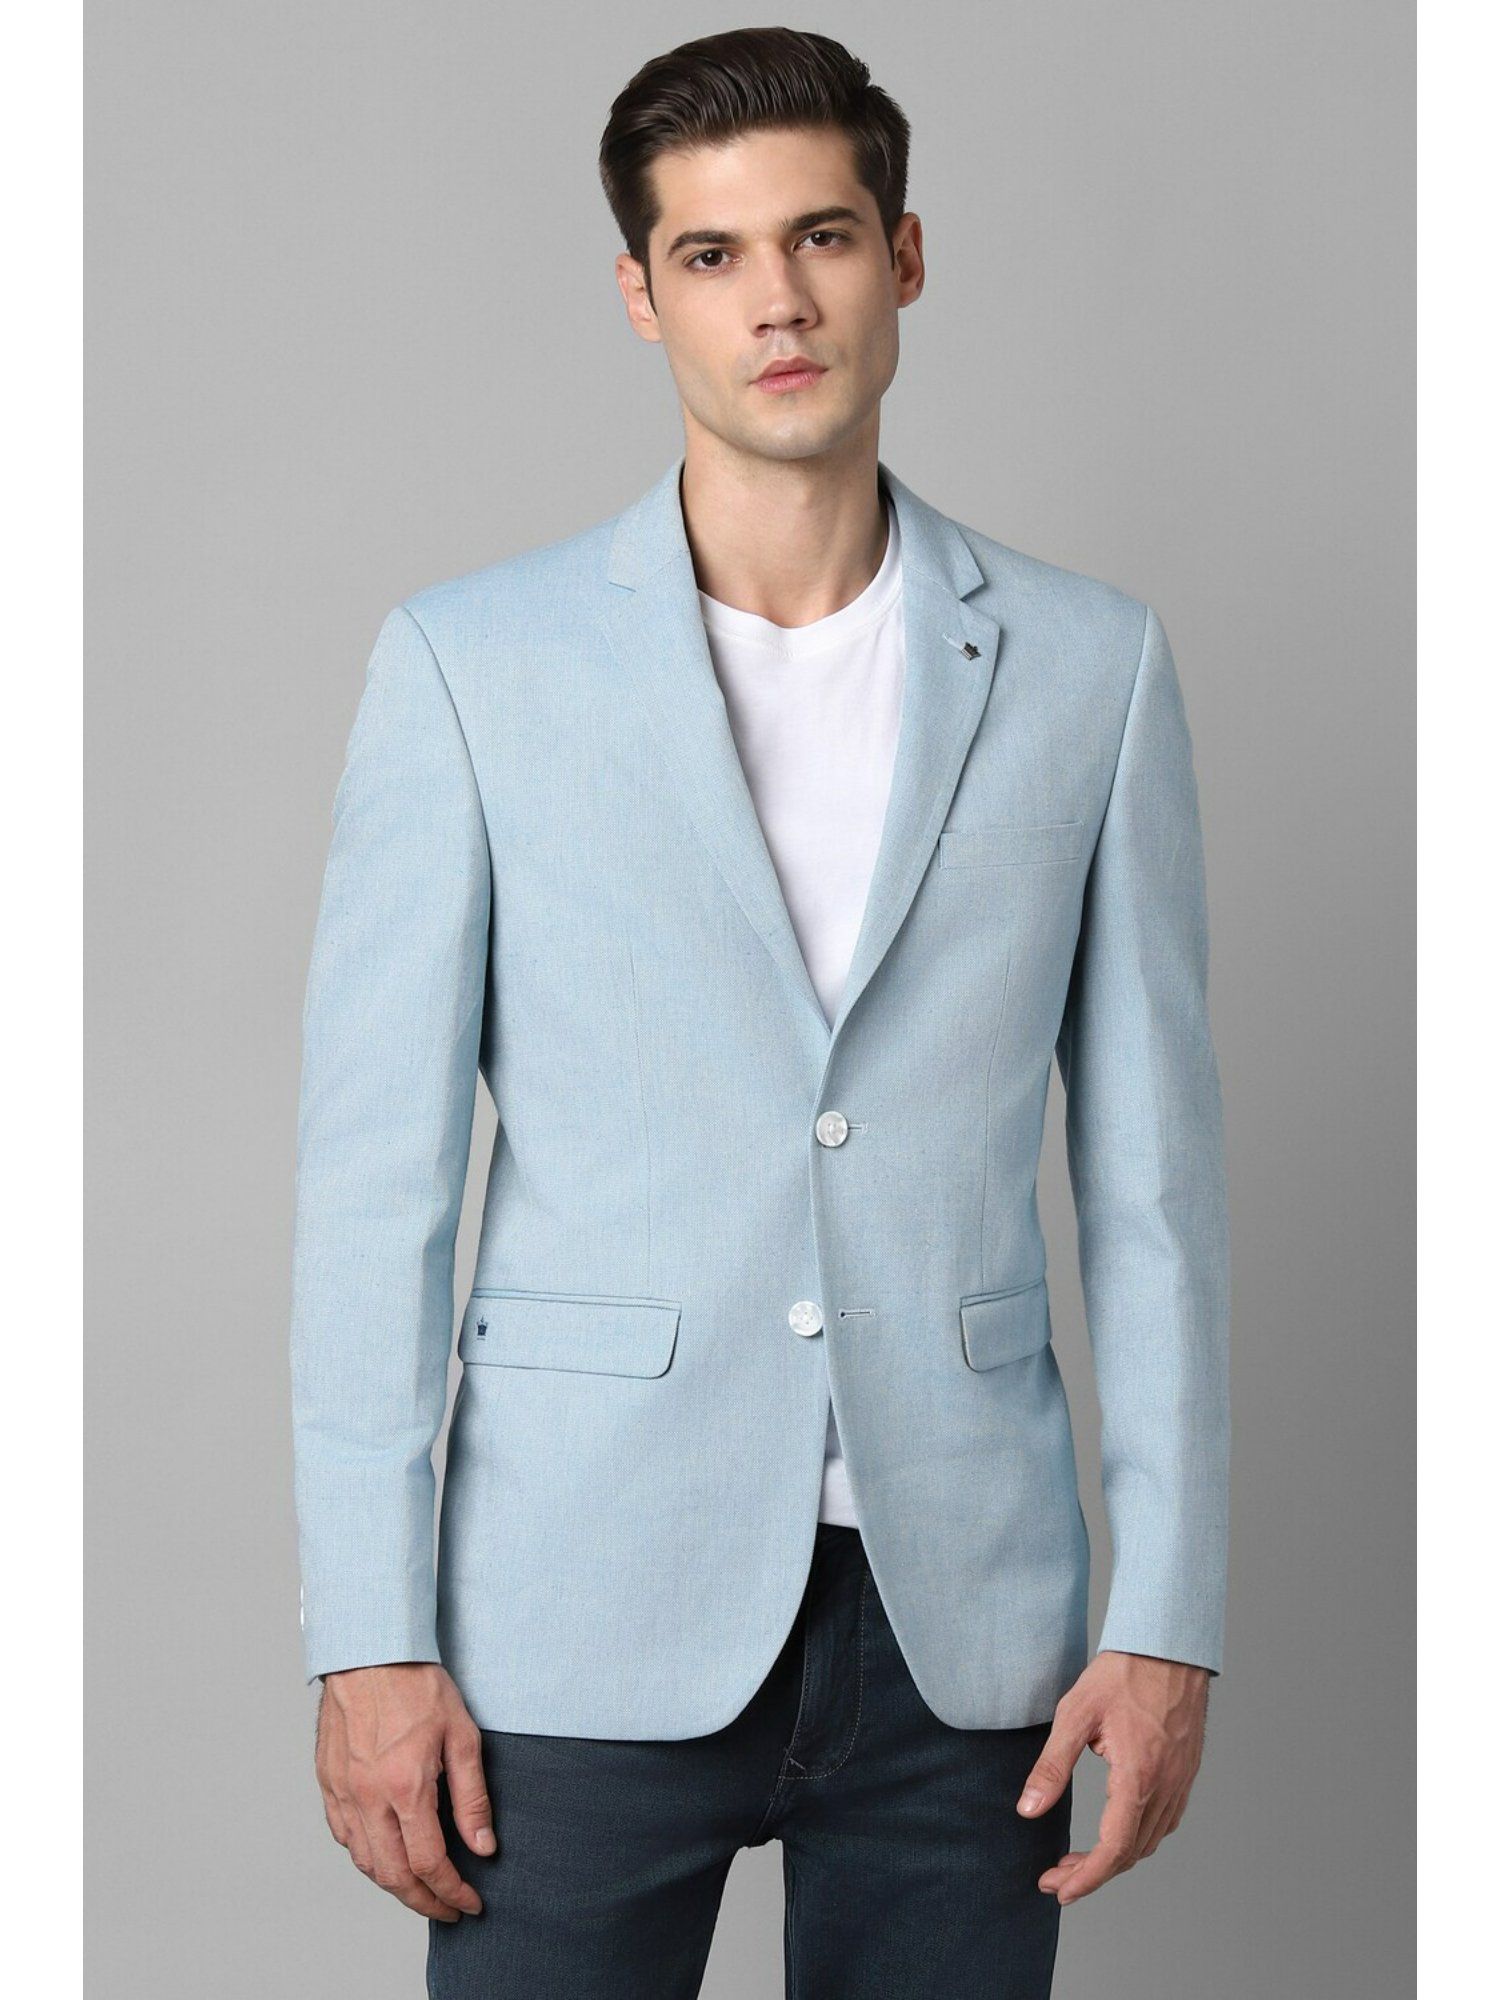 Buy LOUIS PHILIPPE Textured Polyester Cotton Slim Fit Men's Casual Blazer